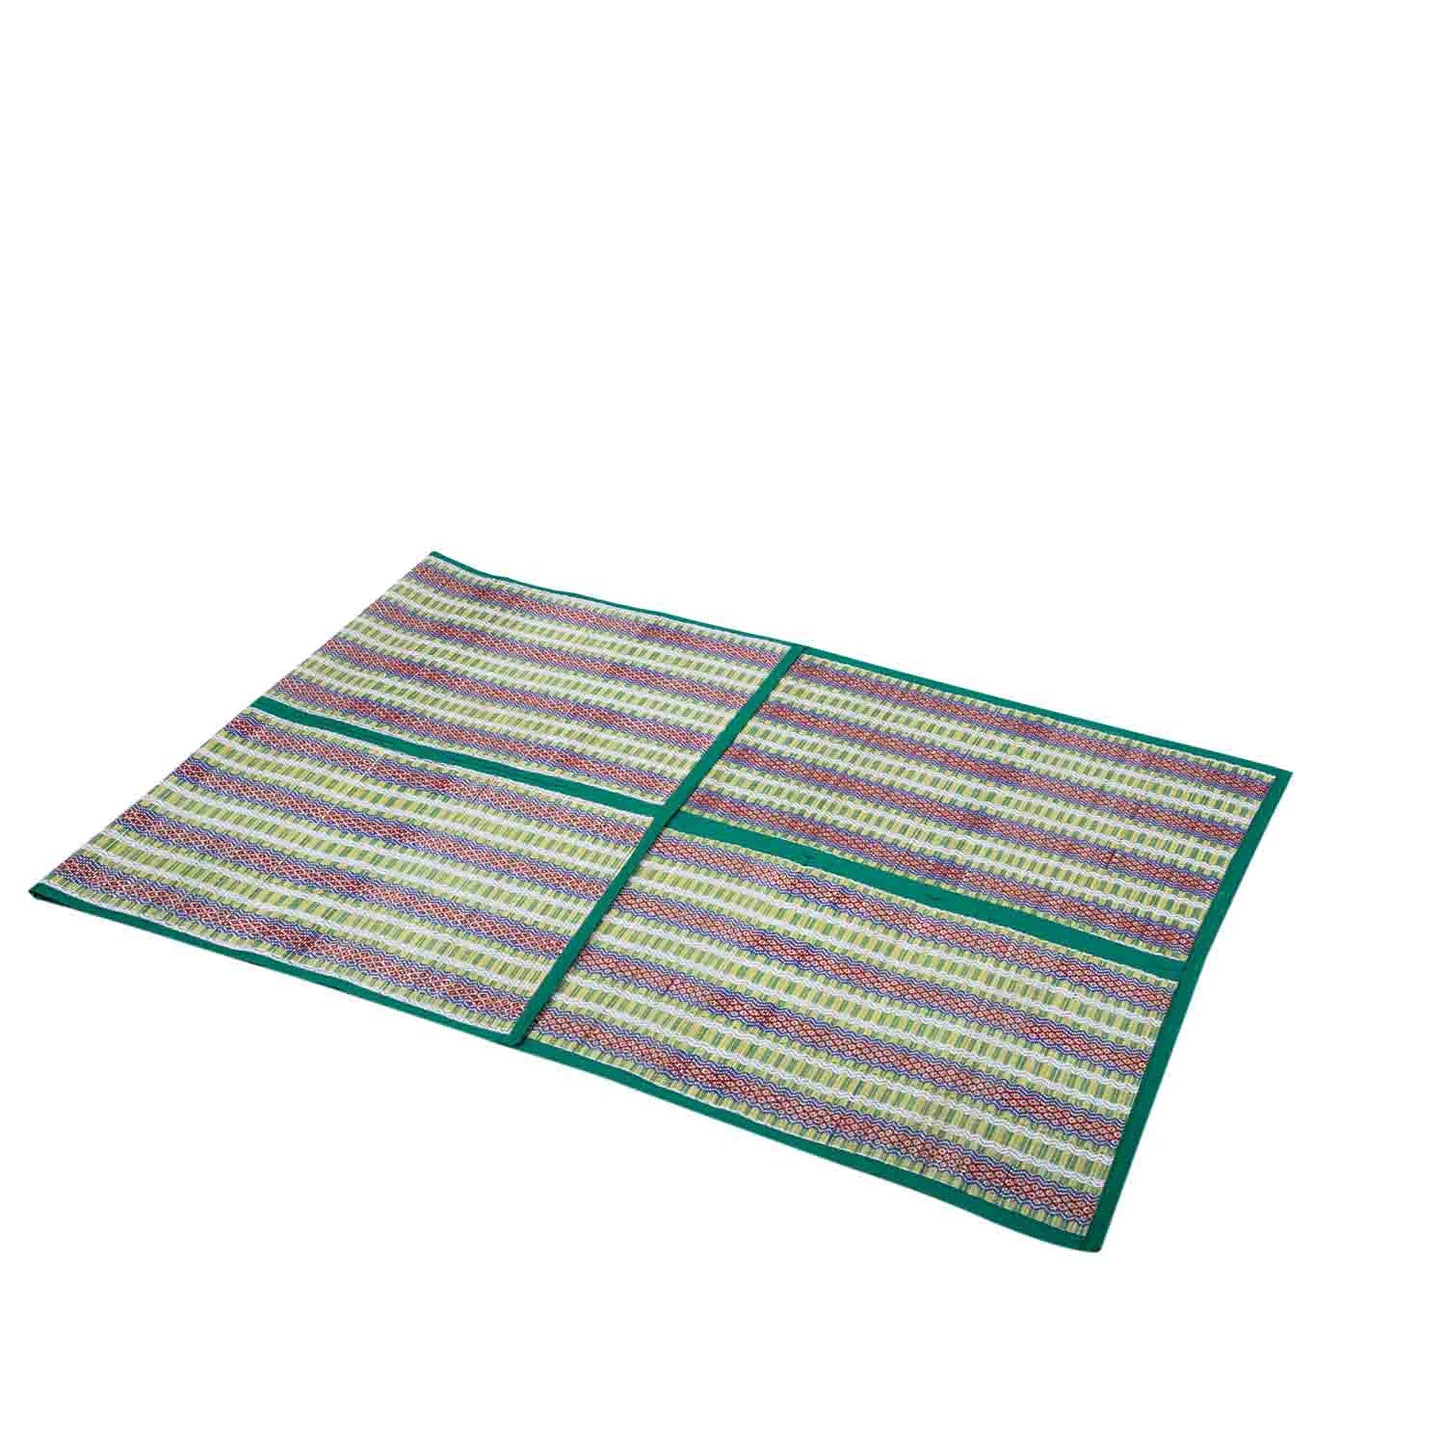 Madurkathi Chatai Mat Foldable Handwoven Eco-friendly perfect for sleeping, sitting, Yoga - T3-39